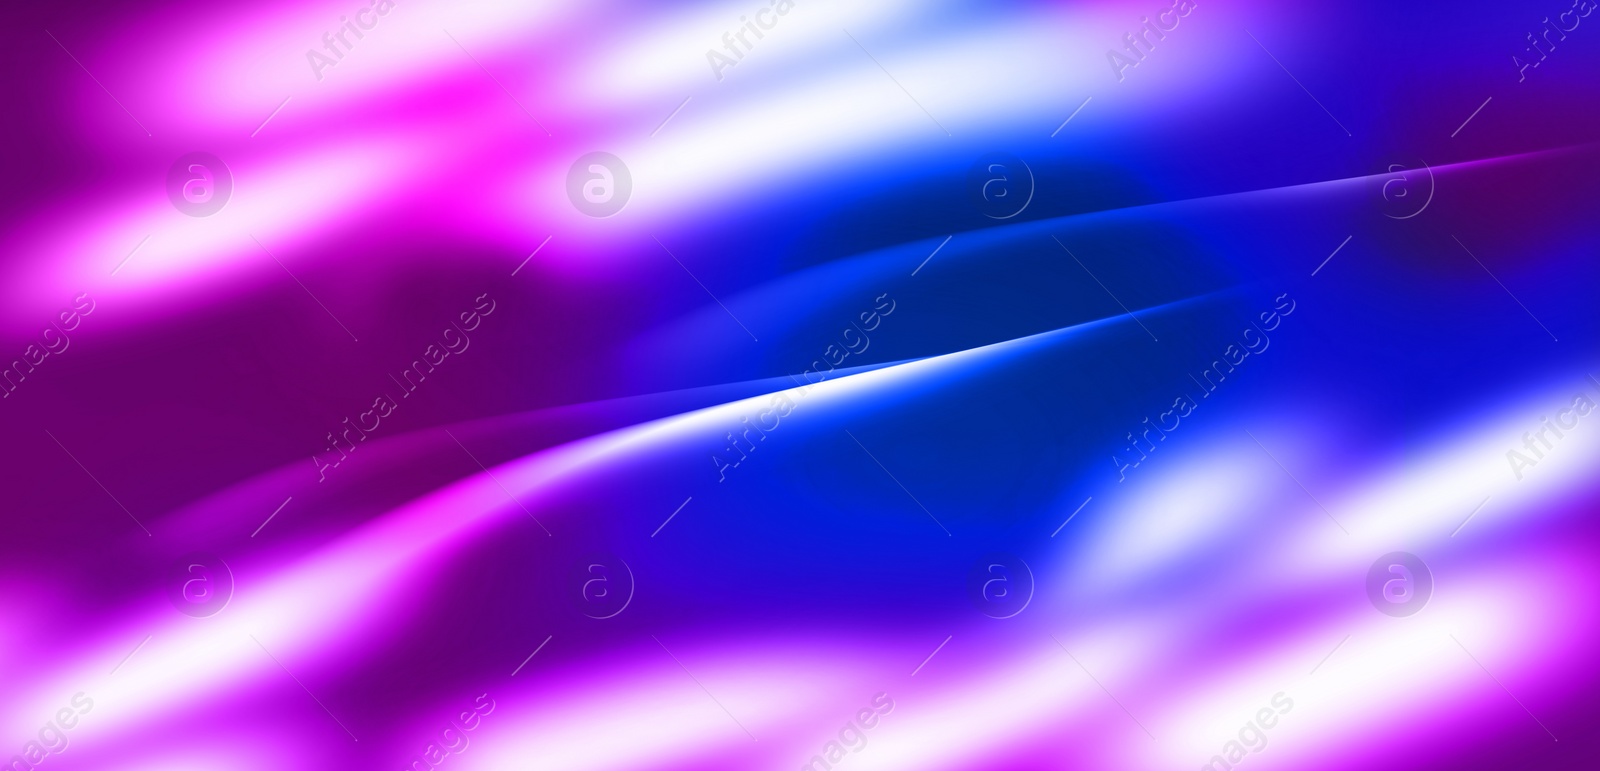 Illustration of Beautiful colorful neon background. Bright banner design